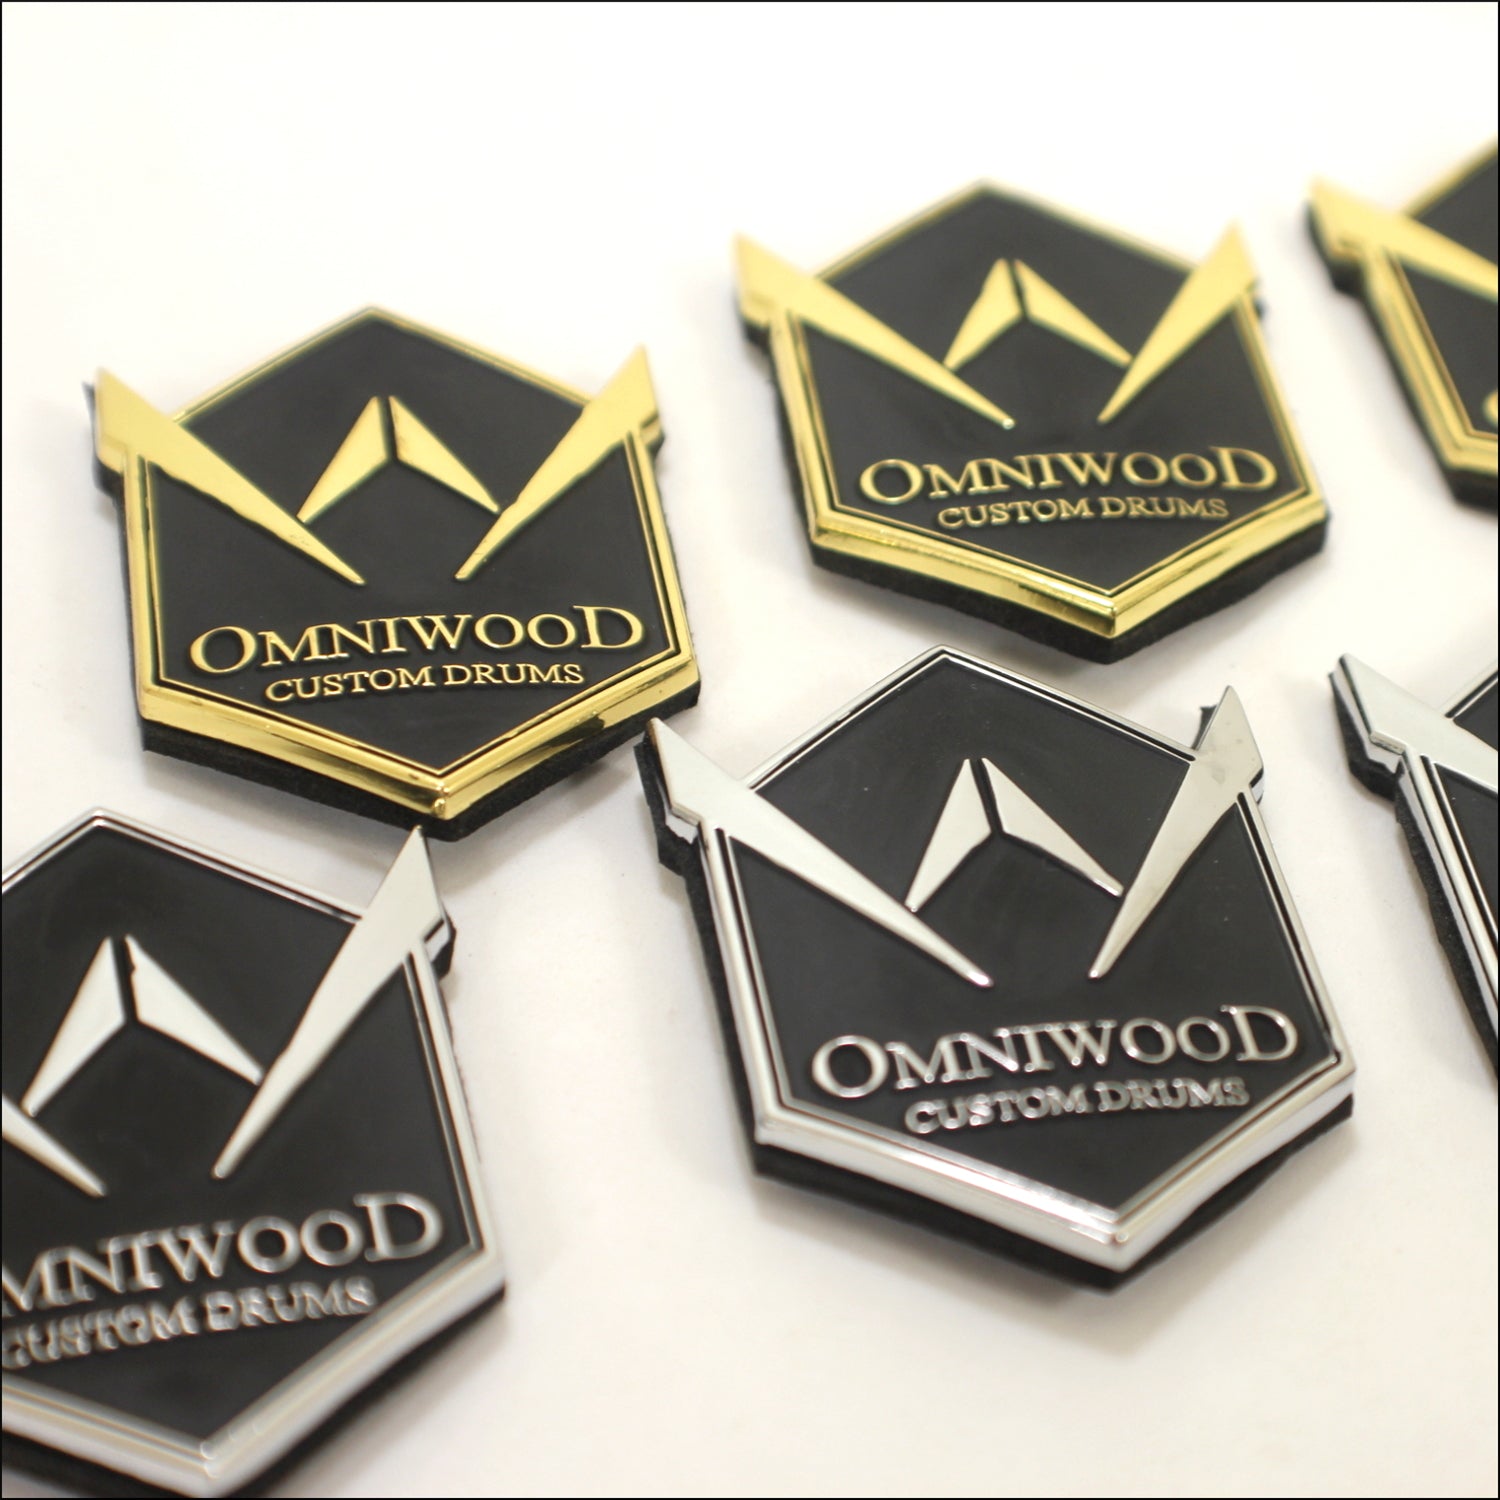 Die casted custom badges used for instruments